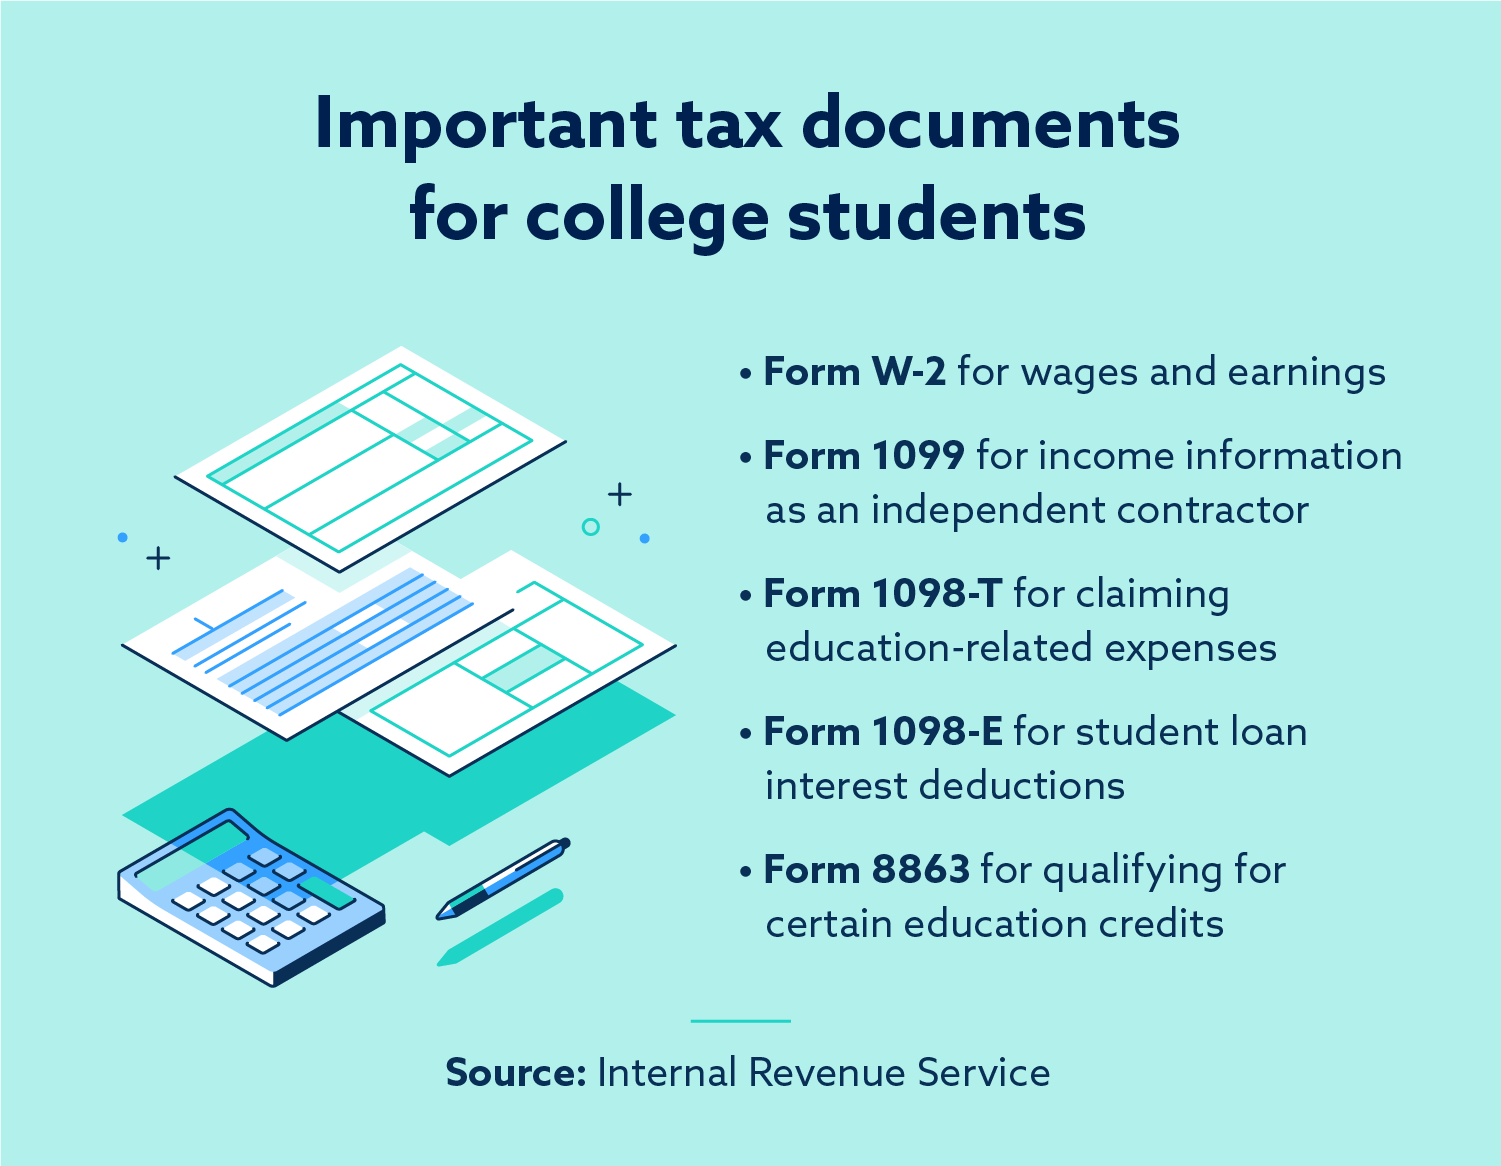 Important tax documents for college students.